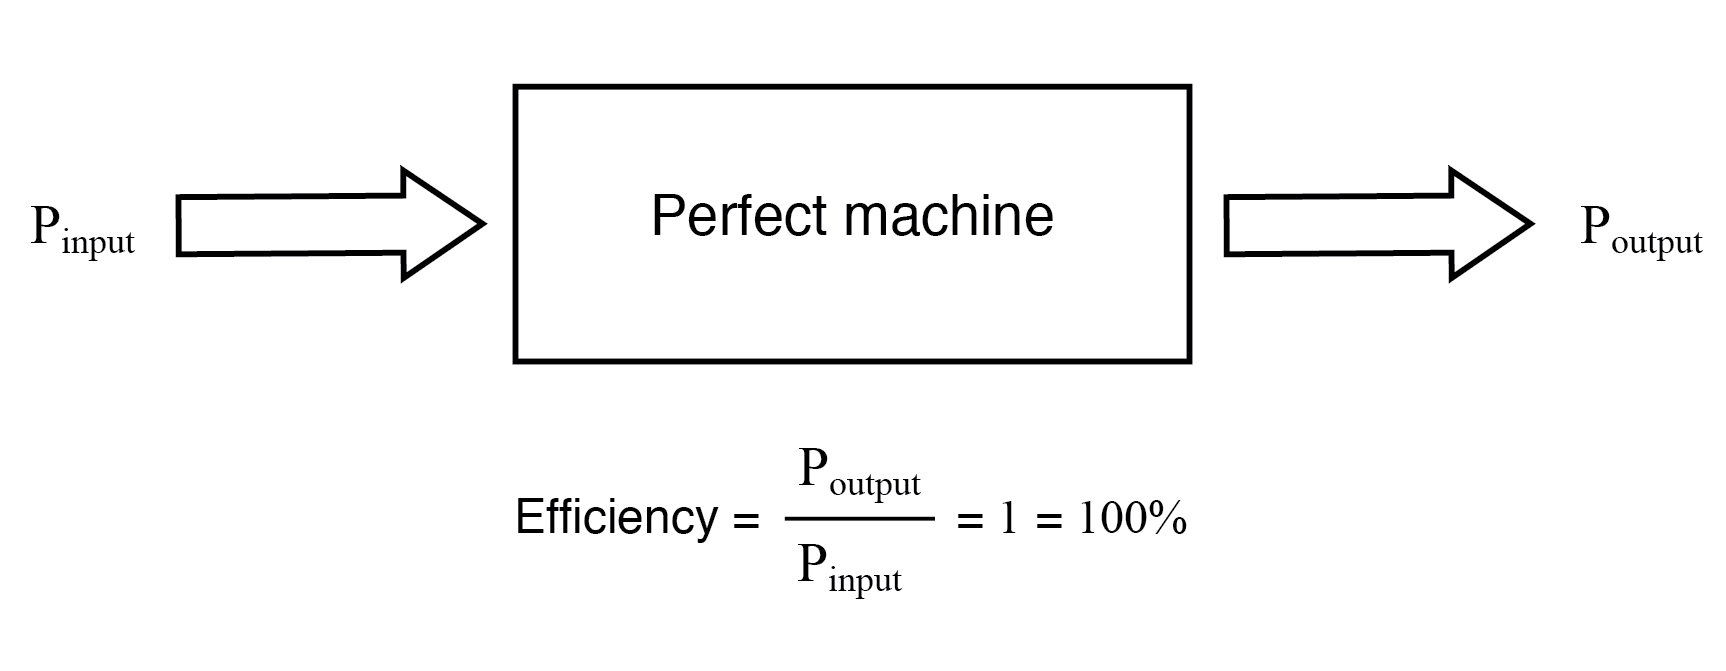 The power output of a machine can approach, but never exceed, the power input for 100% efficiency as an upper limit.